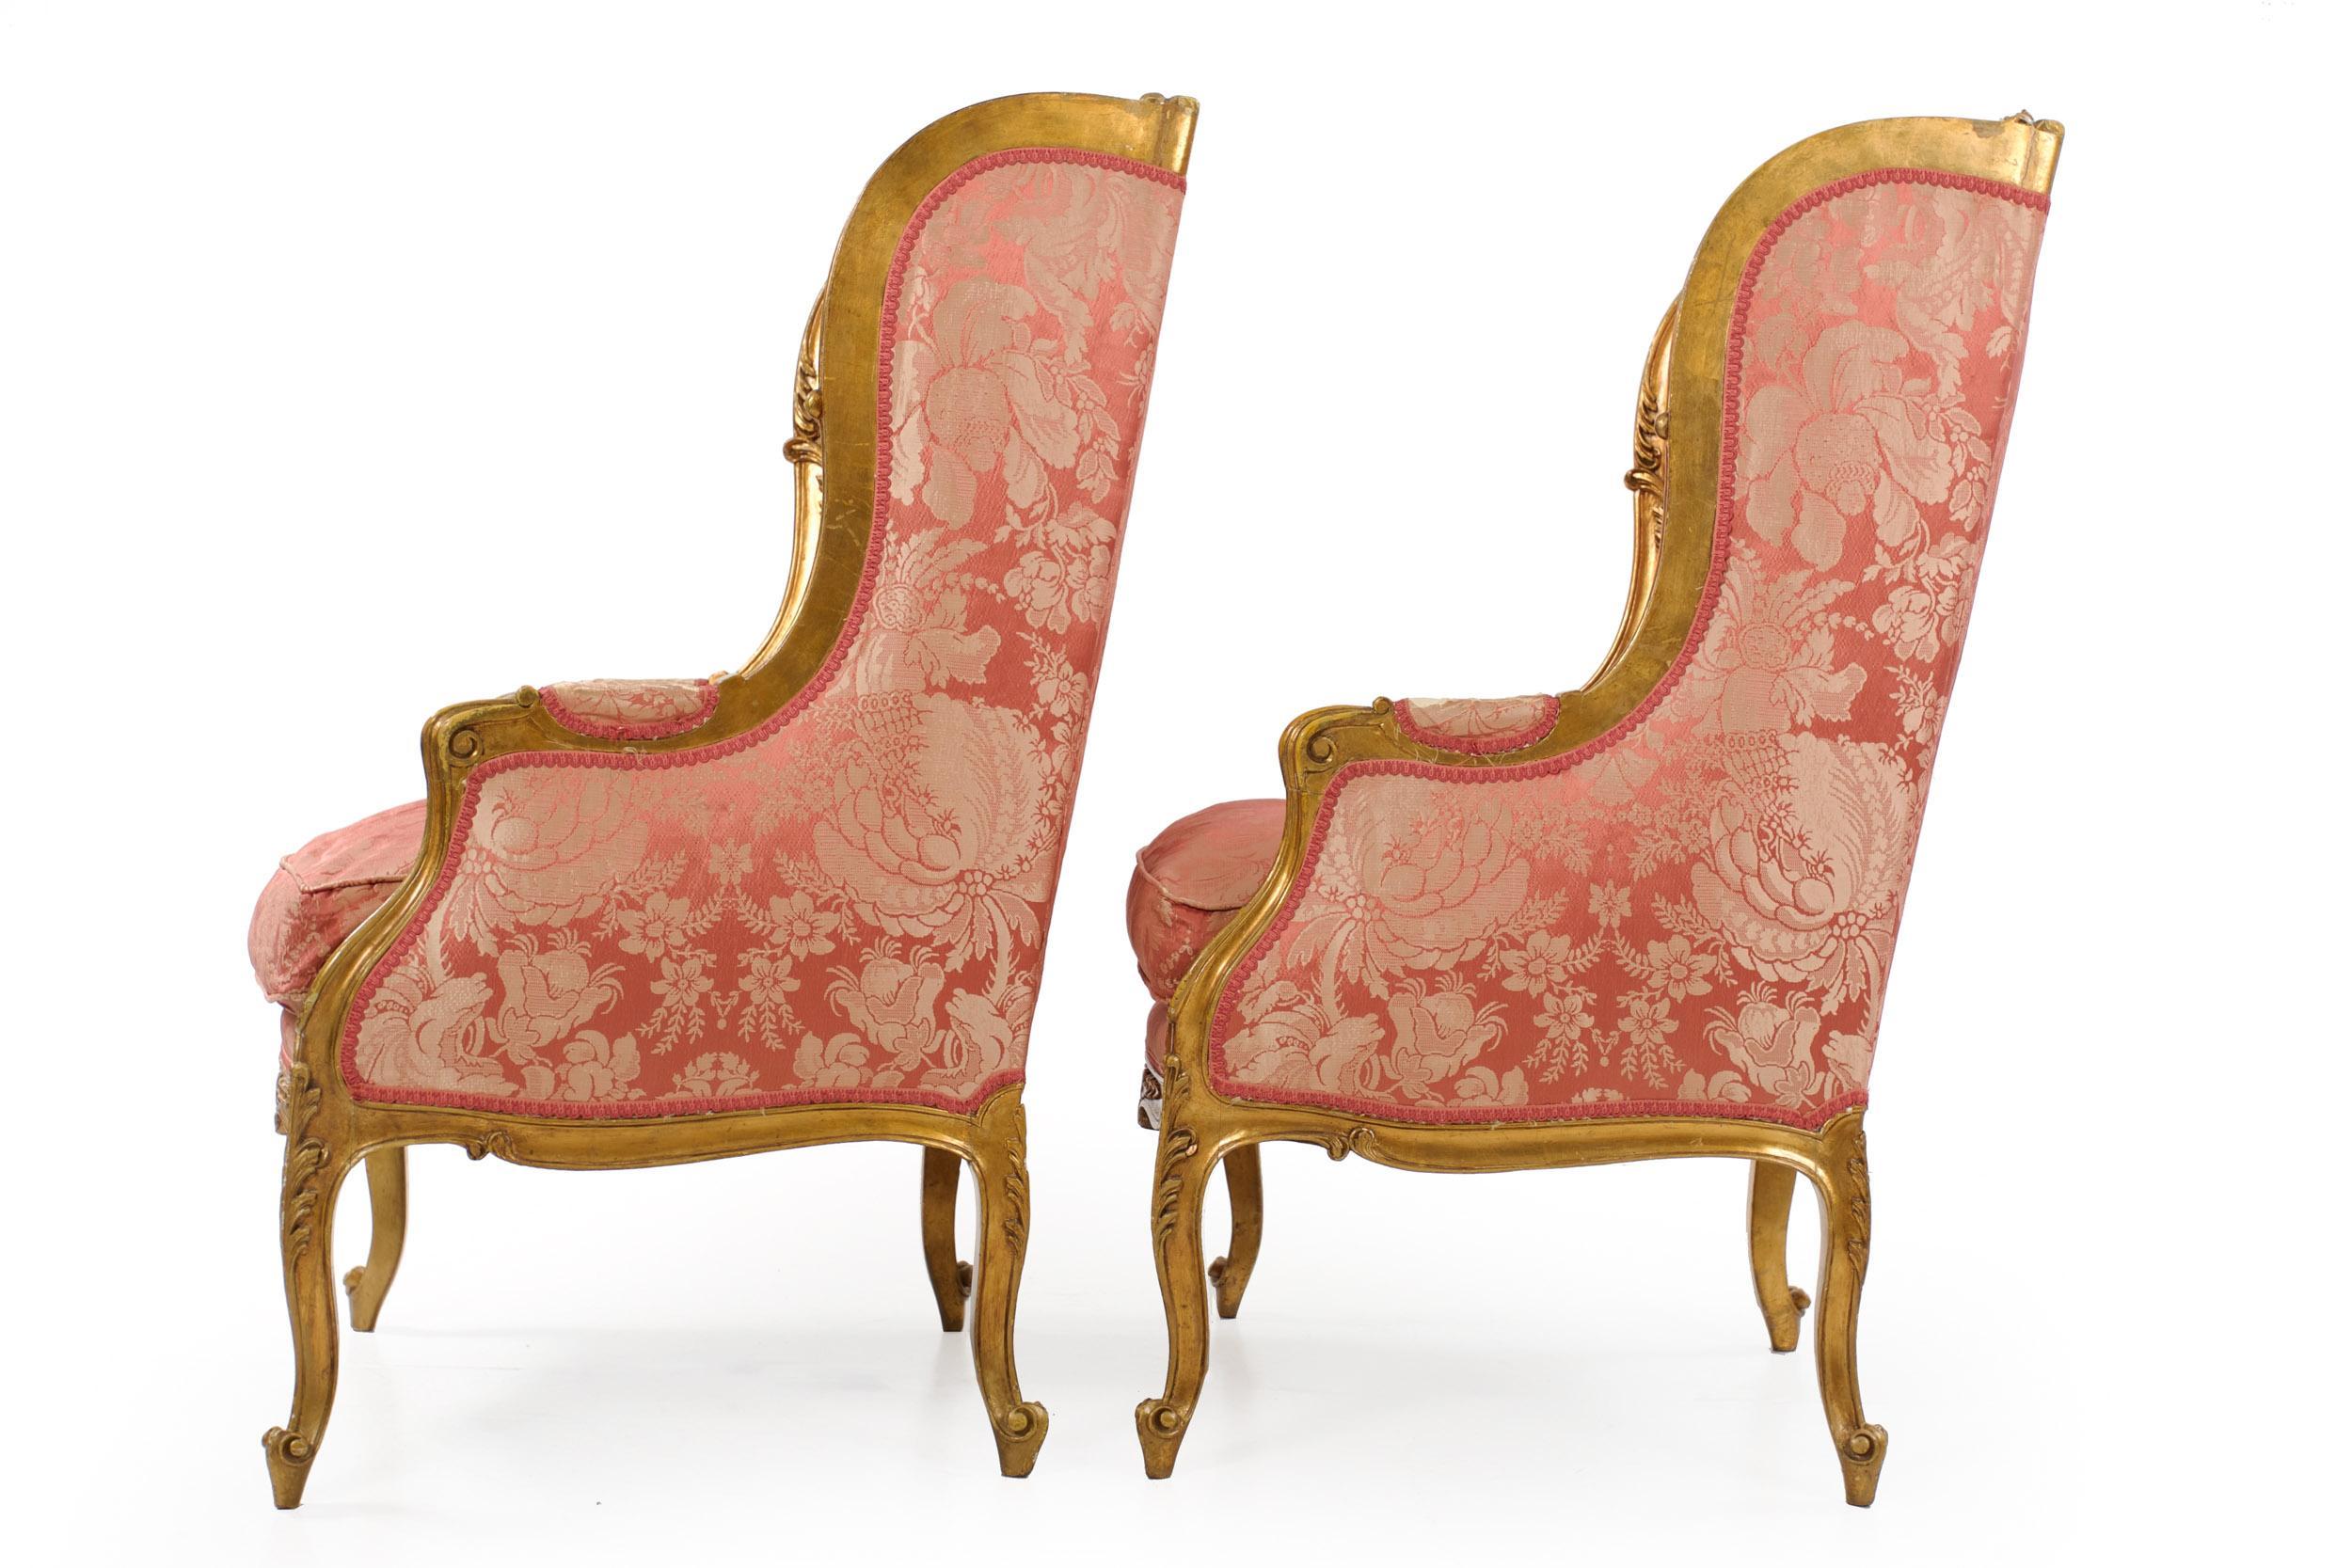 Carved Circa 1880 French Louis XV Style Antique Arm Chairs, a Pair